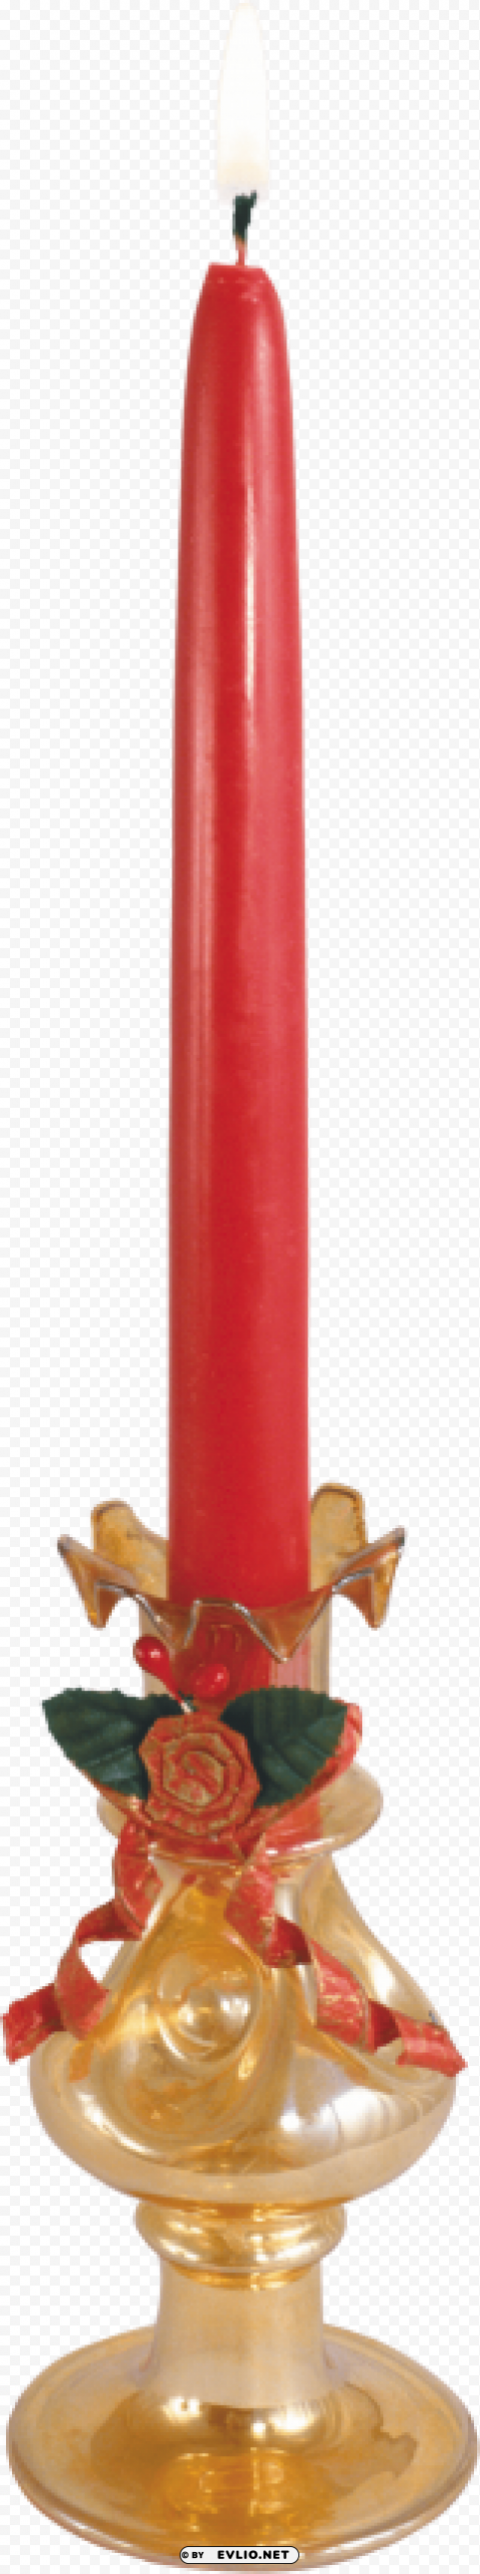 Red Candles PNG Download Free